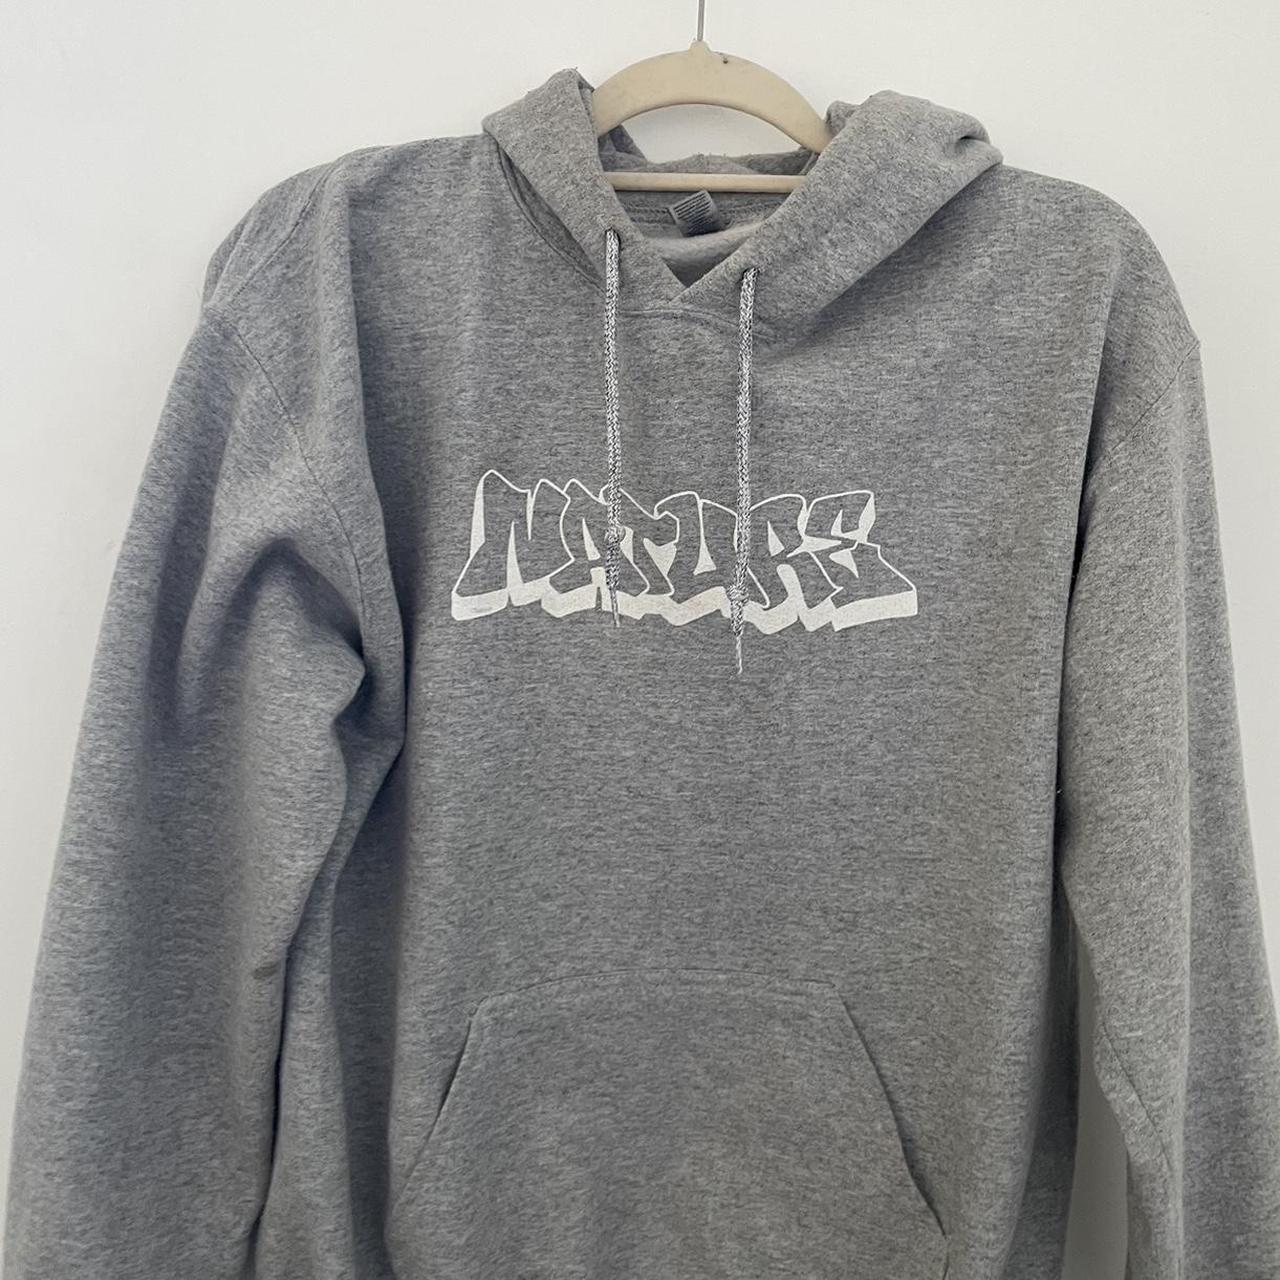 grey NATURE hoodie -size: small -offer me 💰... - Depop